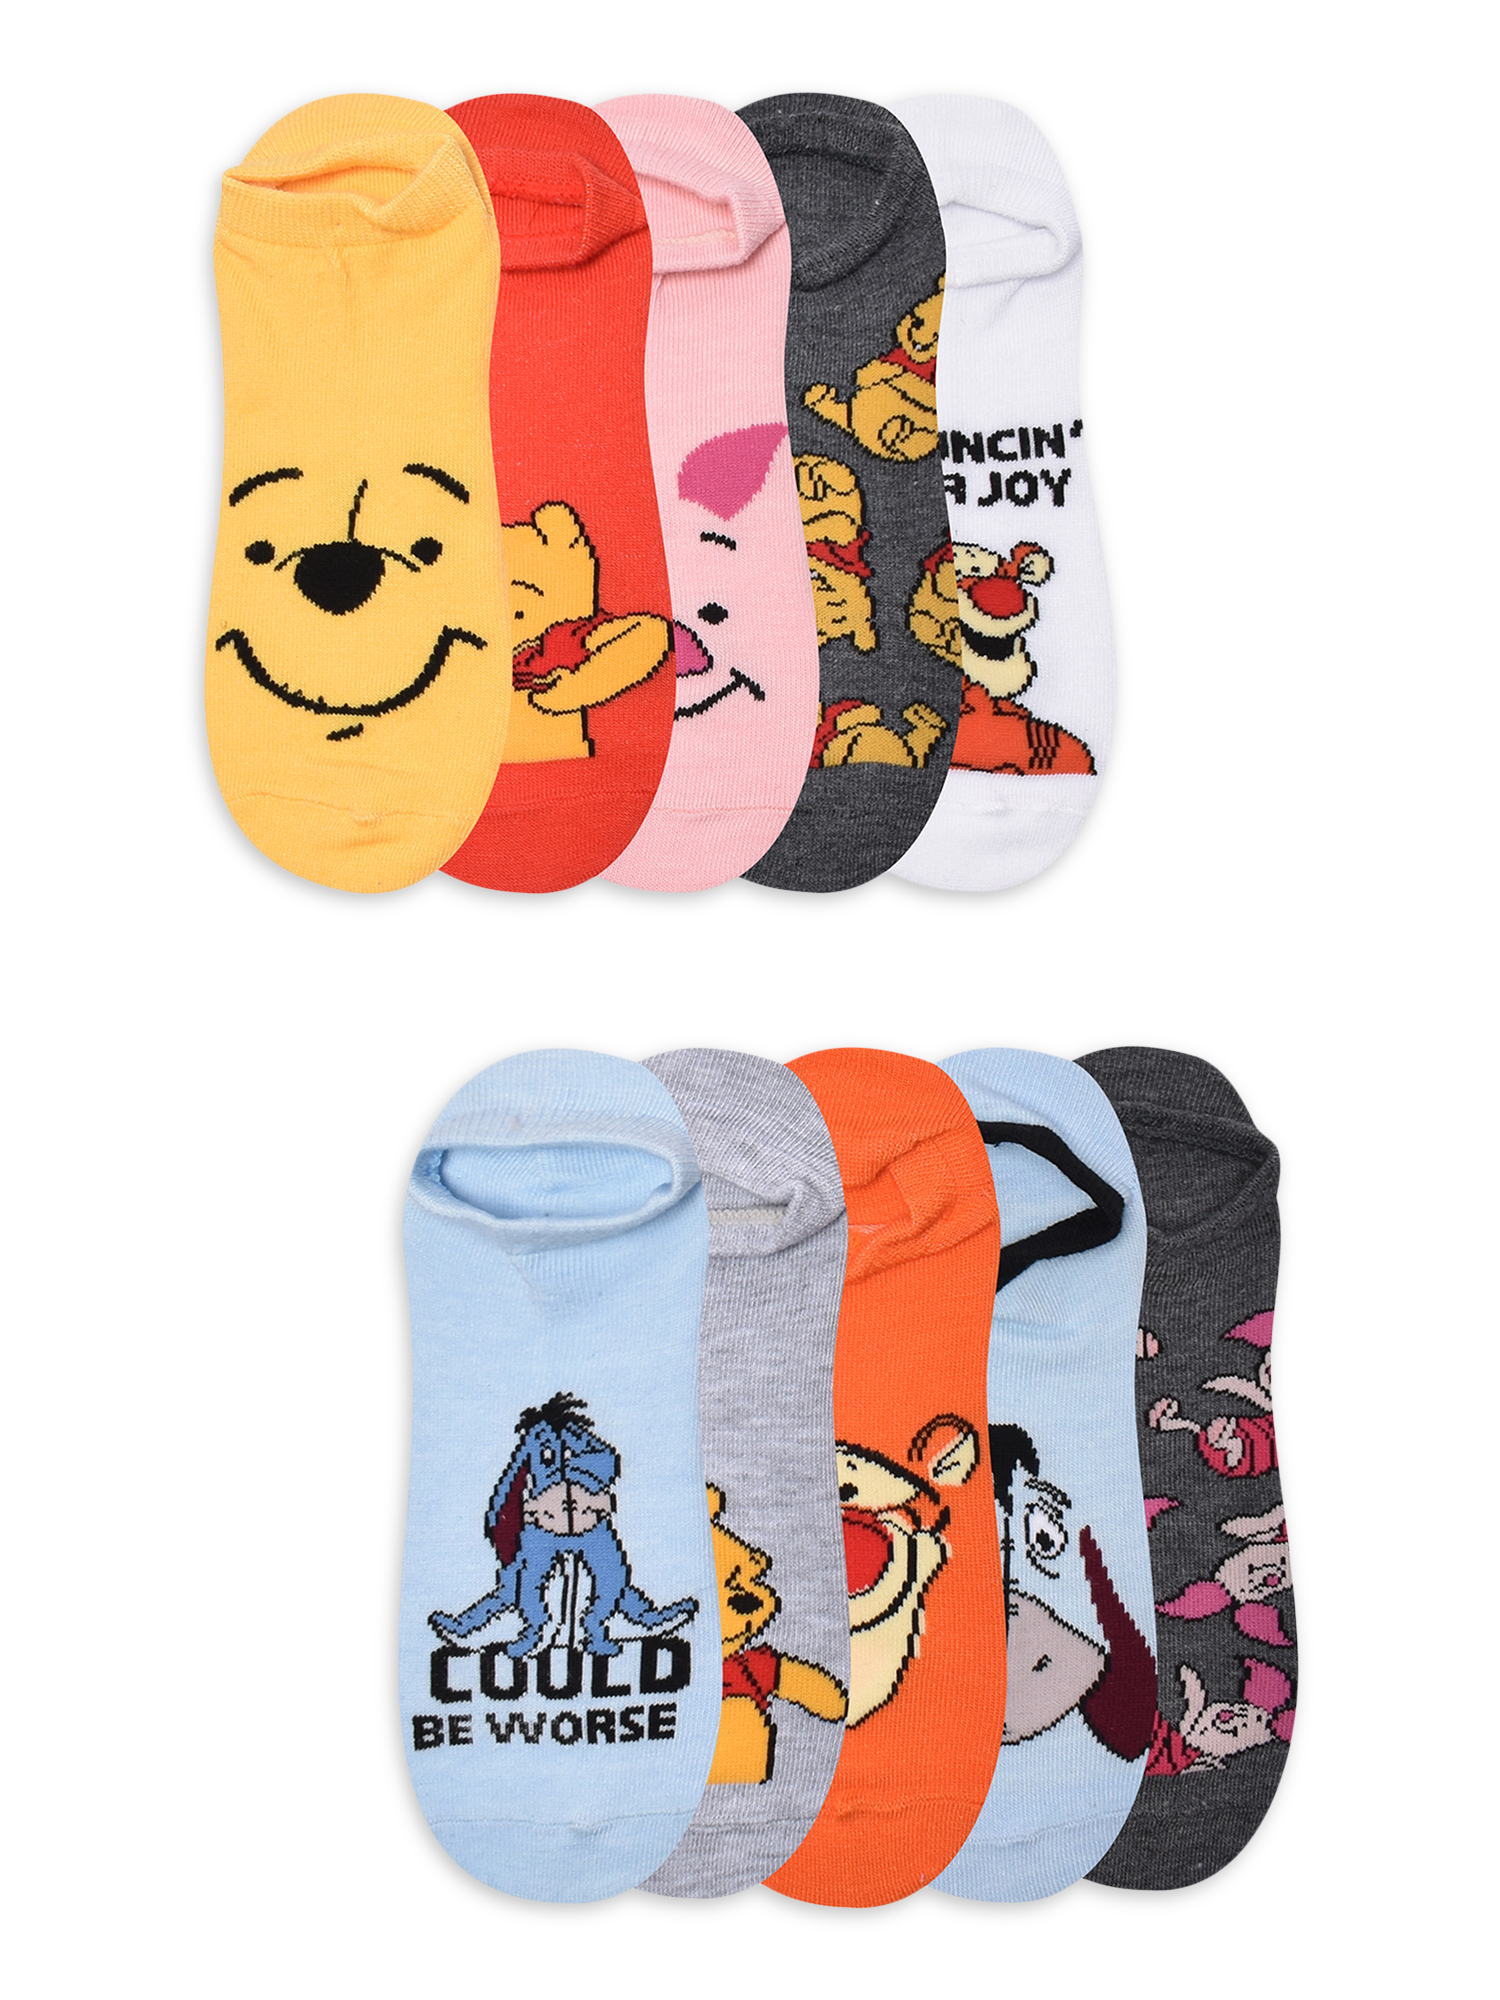 Disney Womens Winnie the Pooh Graphic Super No Show Socks, 10-Pack, Sizes 4-10 - image 1 of 5